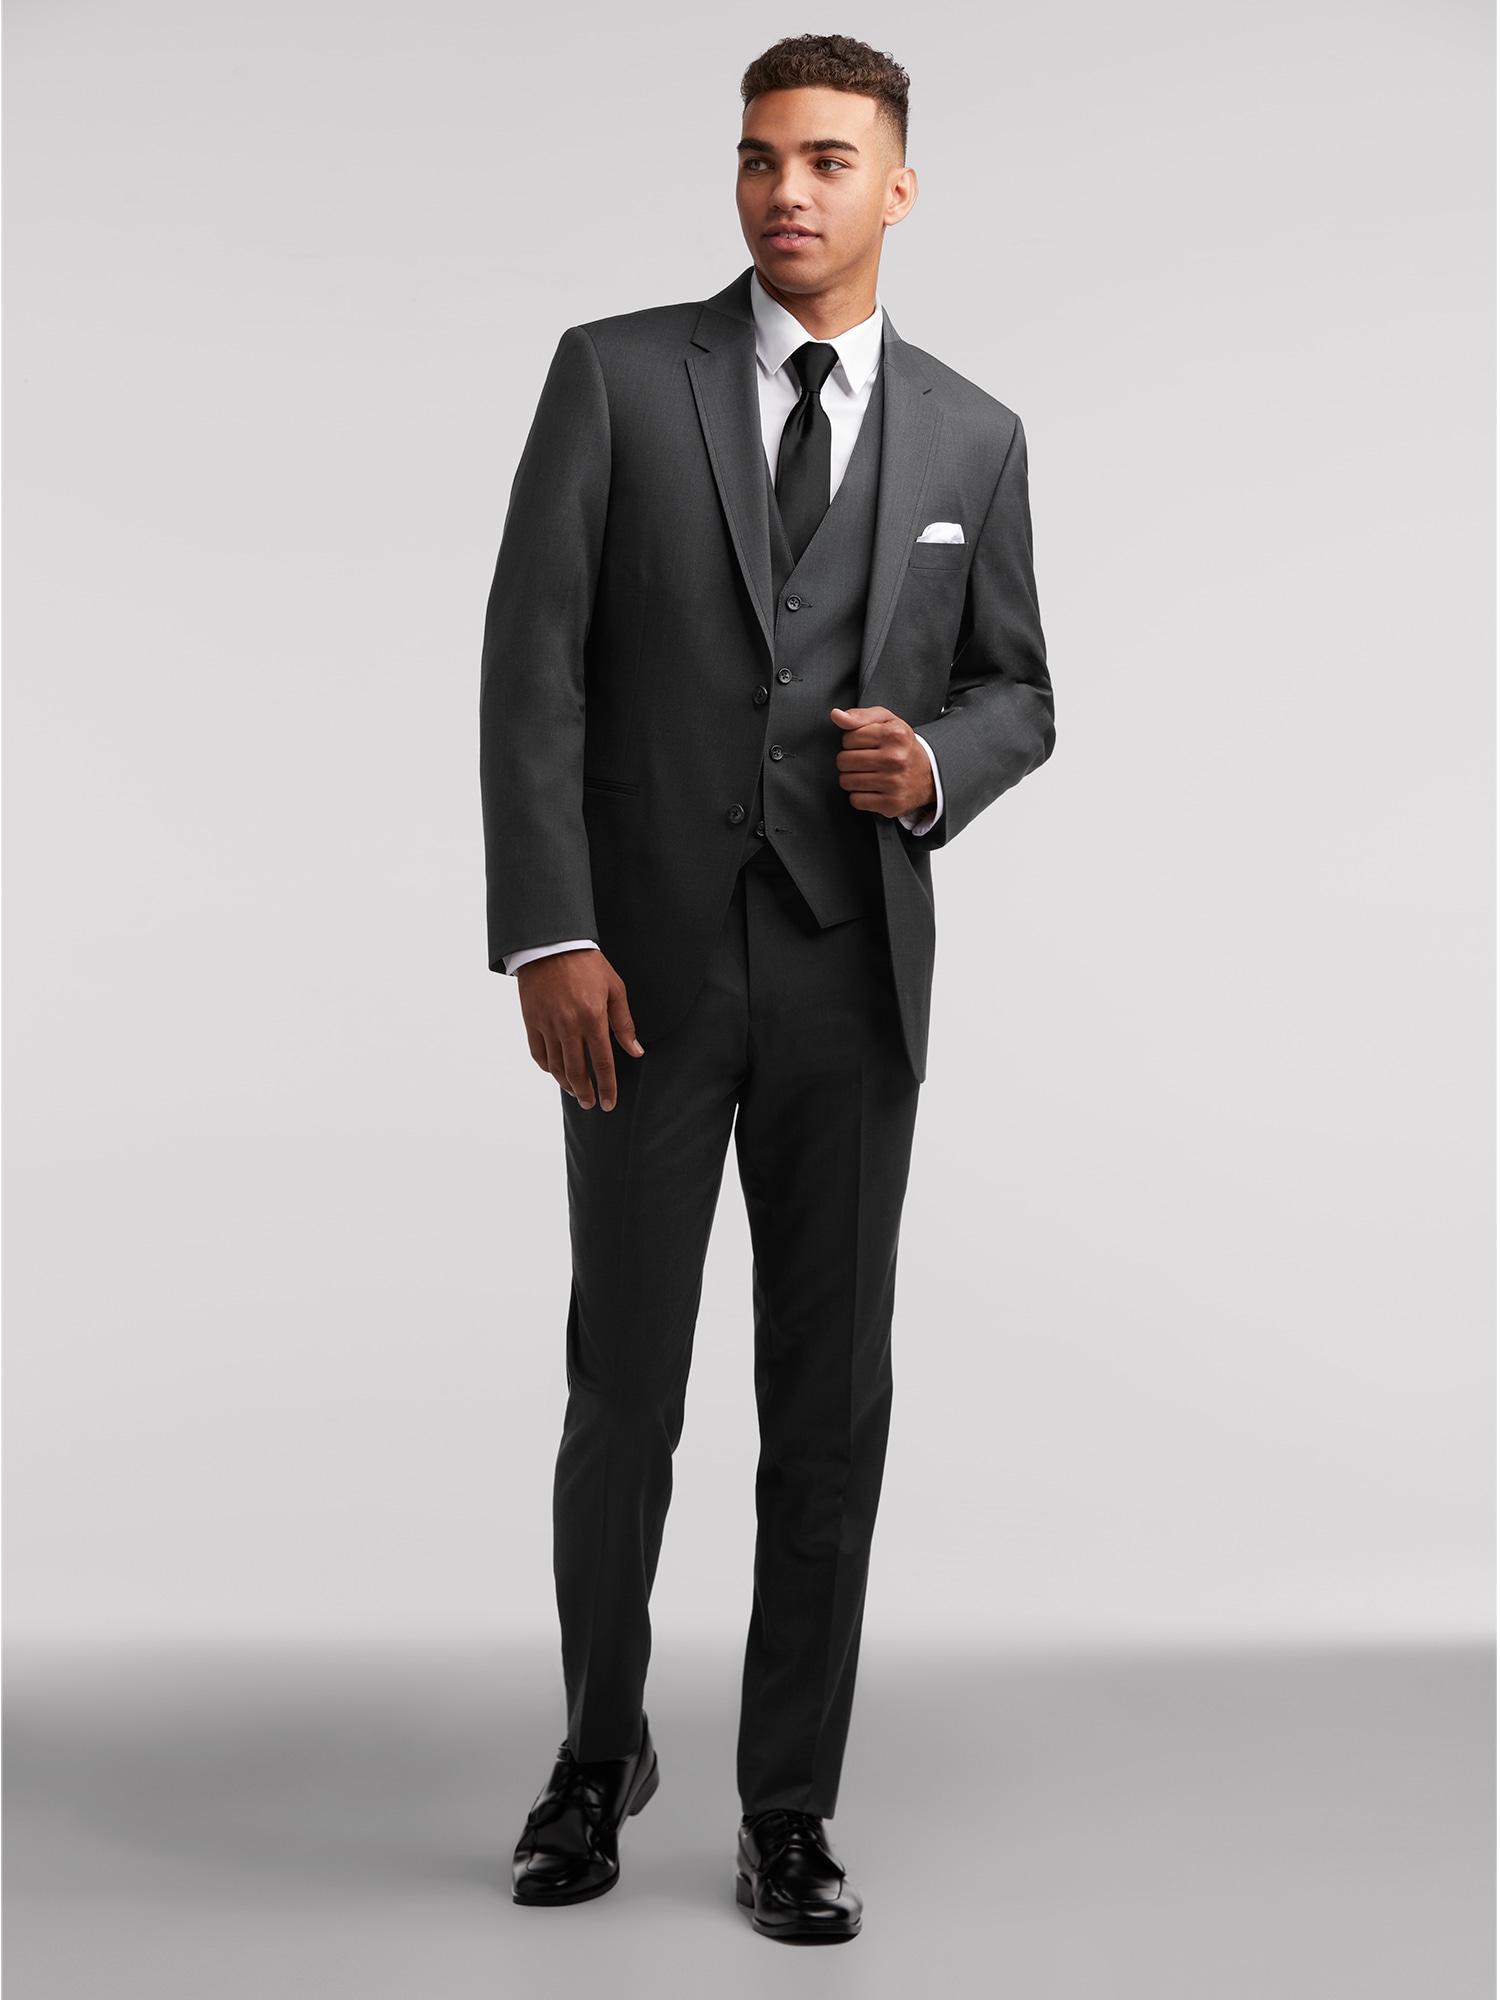 Performance Gray Suit by Calvin Klein | Suit Rental | Moores Clothing